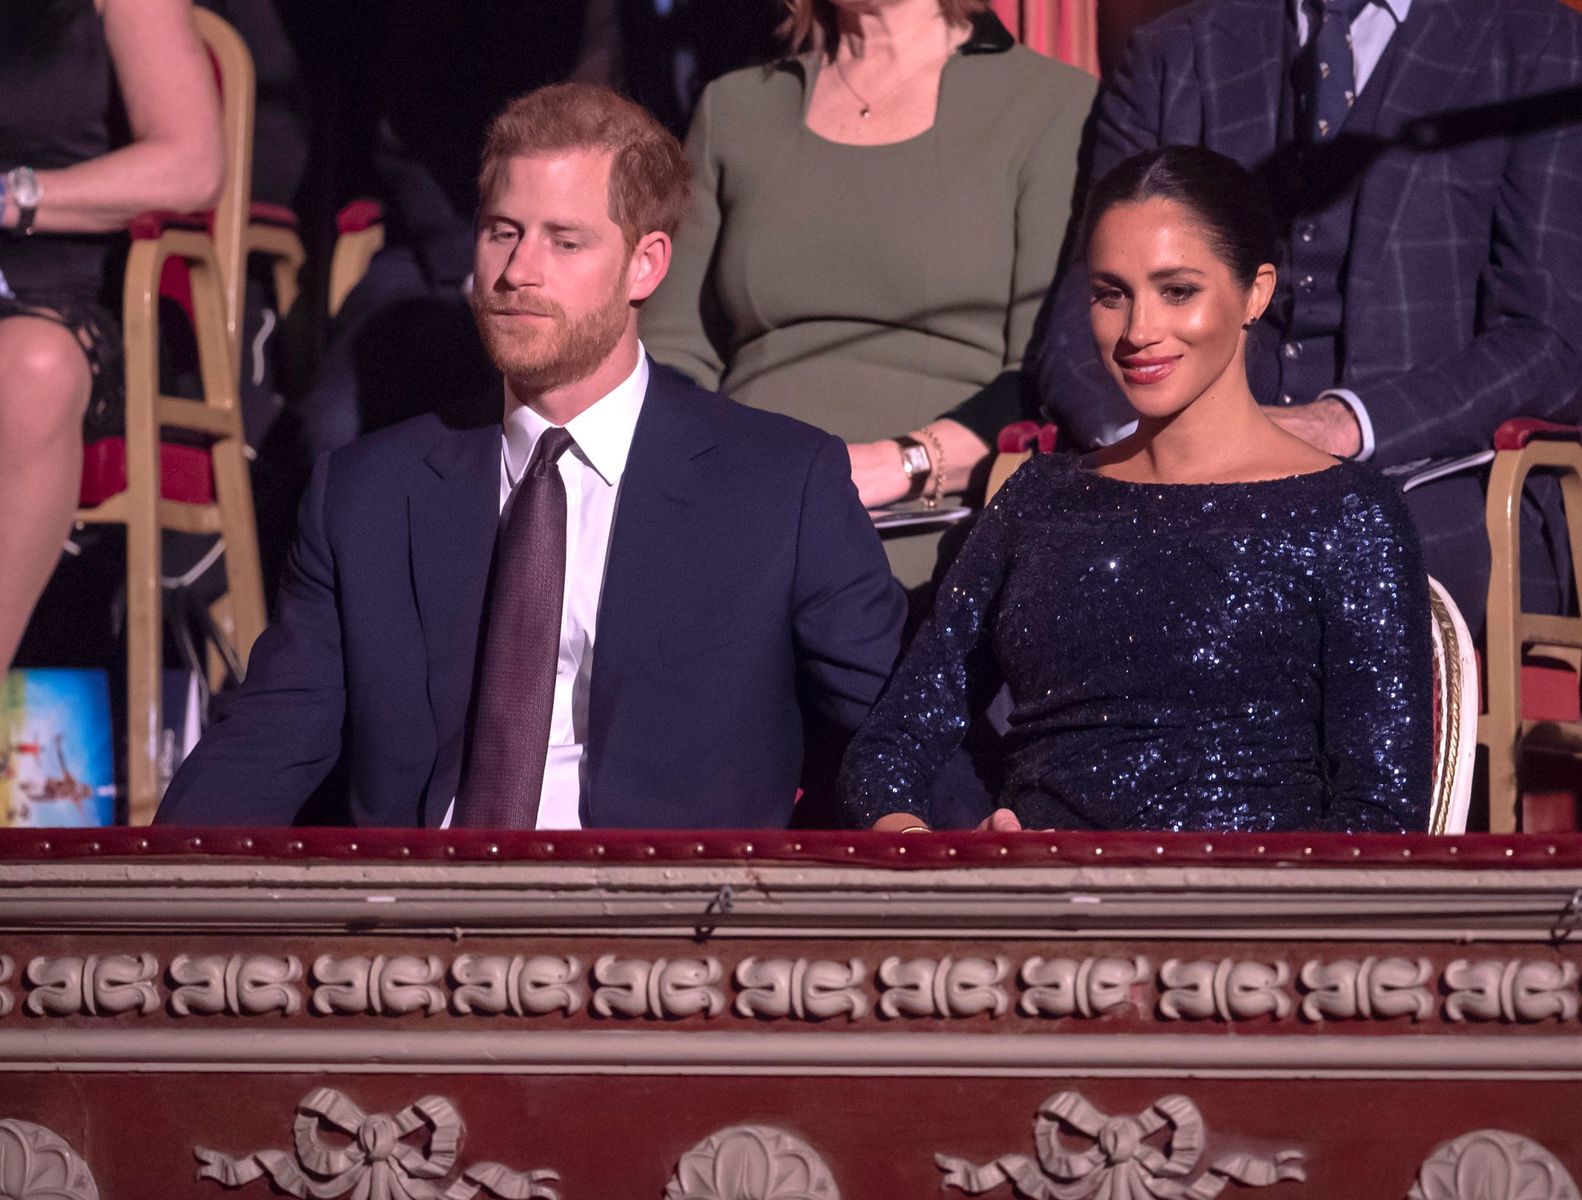 Prince Harry and Meghan Markle at the Cirque du Soleil Premiere Of "TOTEM" at Royal Albert Hall on January 16, 2019. | Getty Images